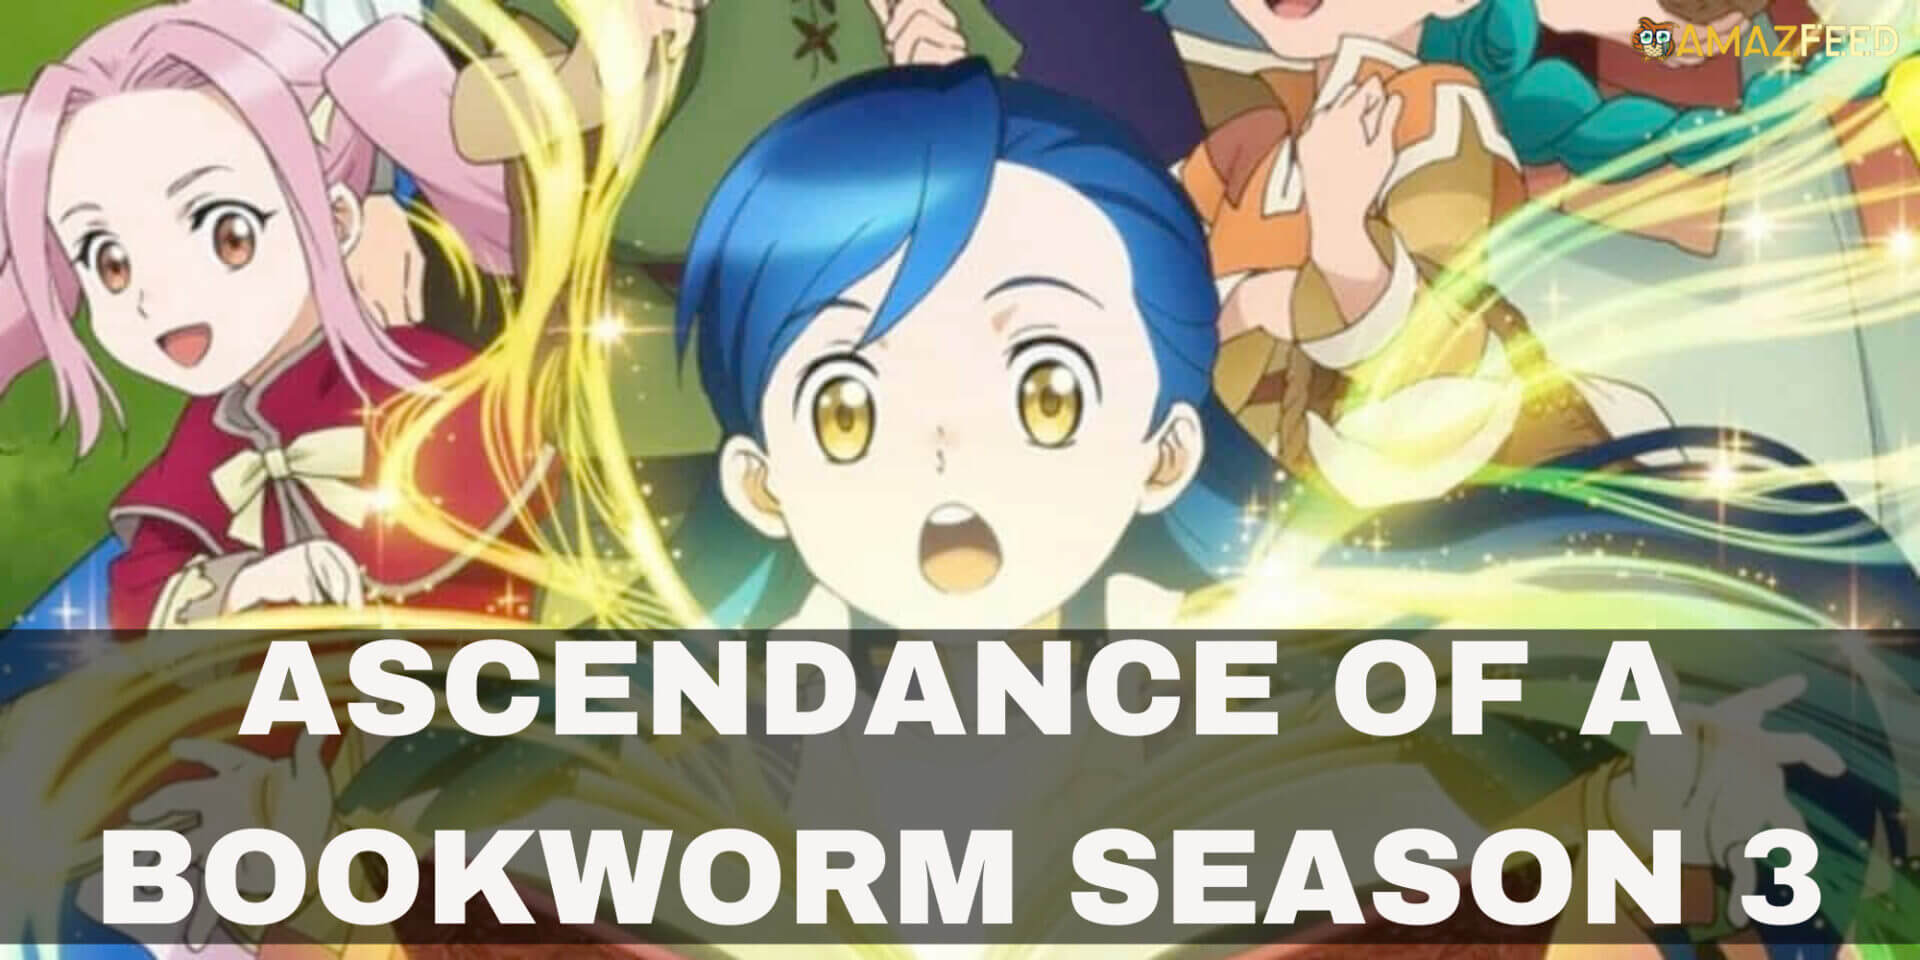 When will Ascendance of a Bookworm Season 3 Be Released